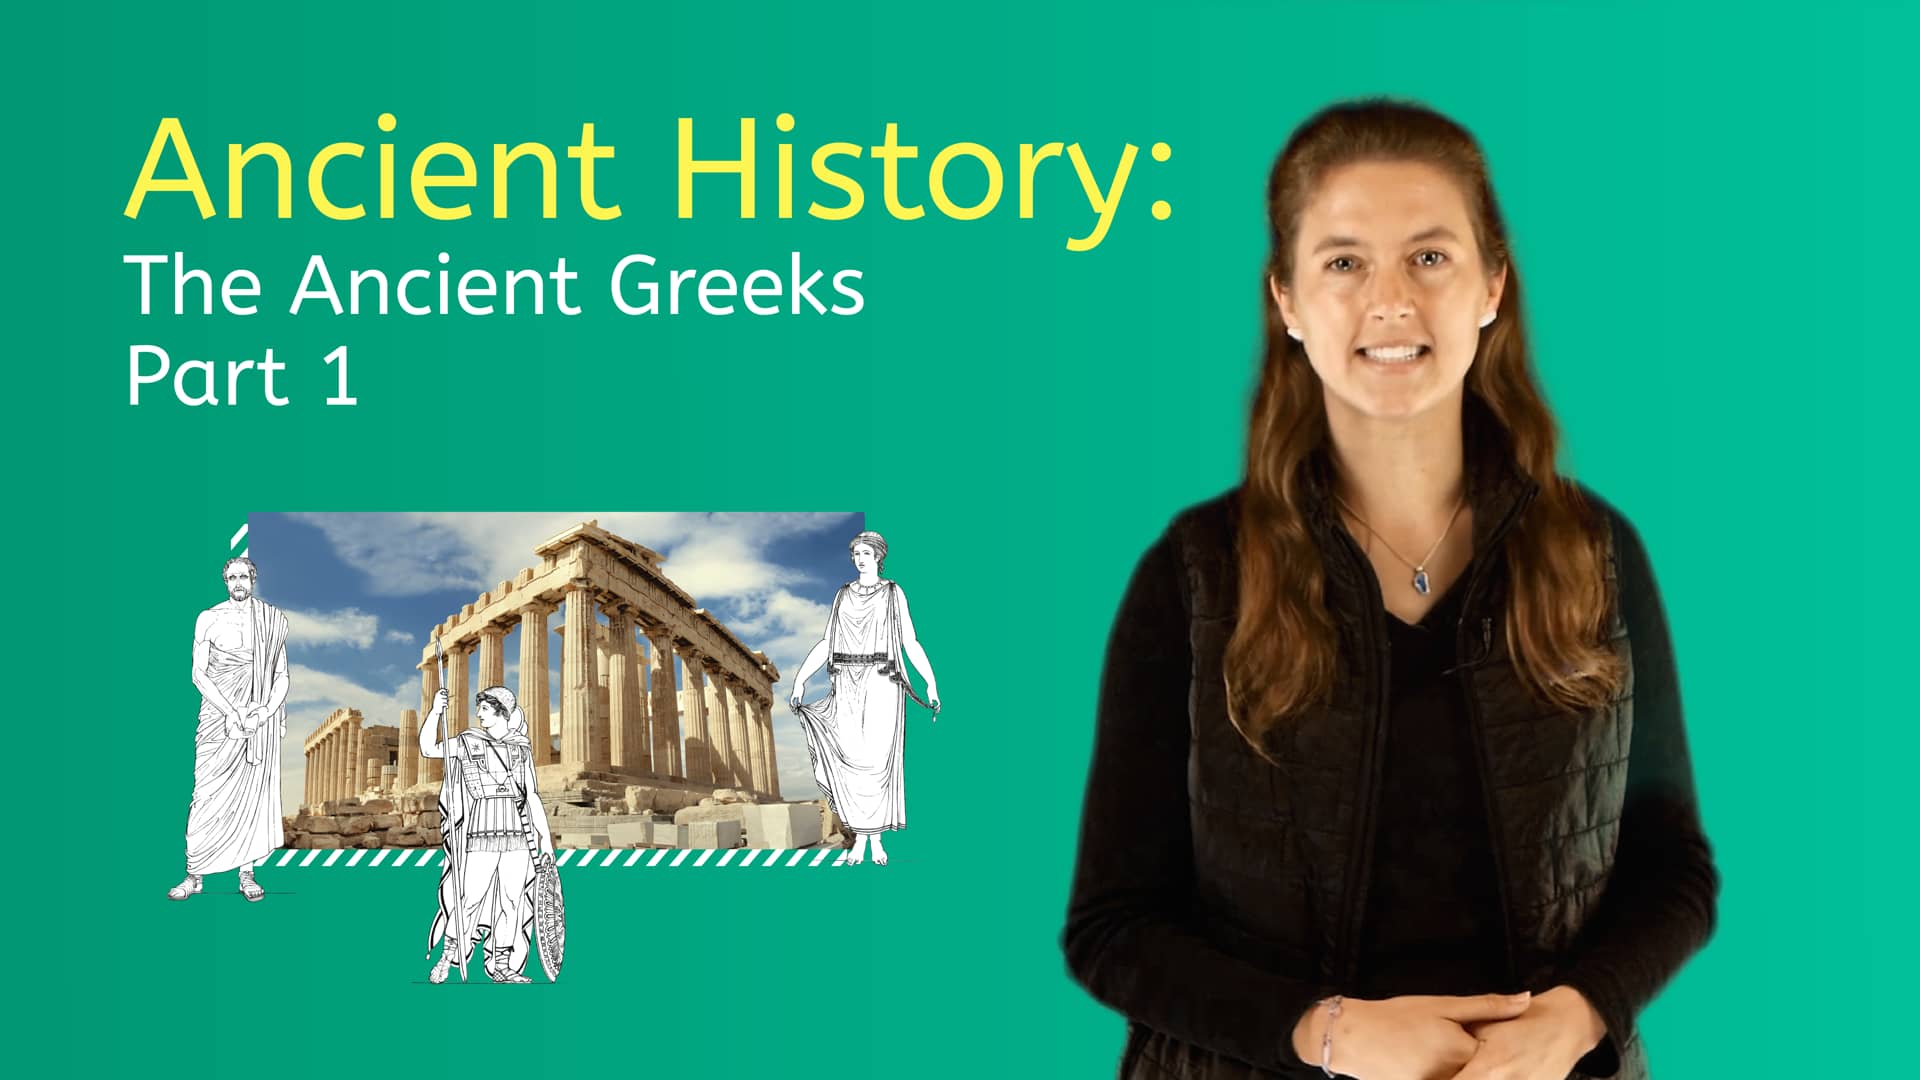 Ancient History: The Ancient Greeks Part 1 on Vimeo